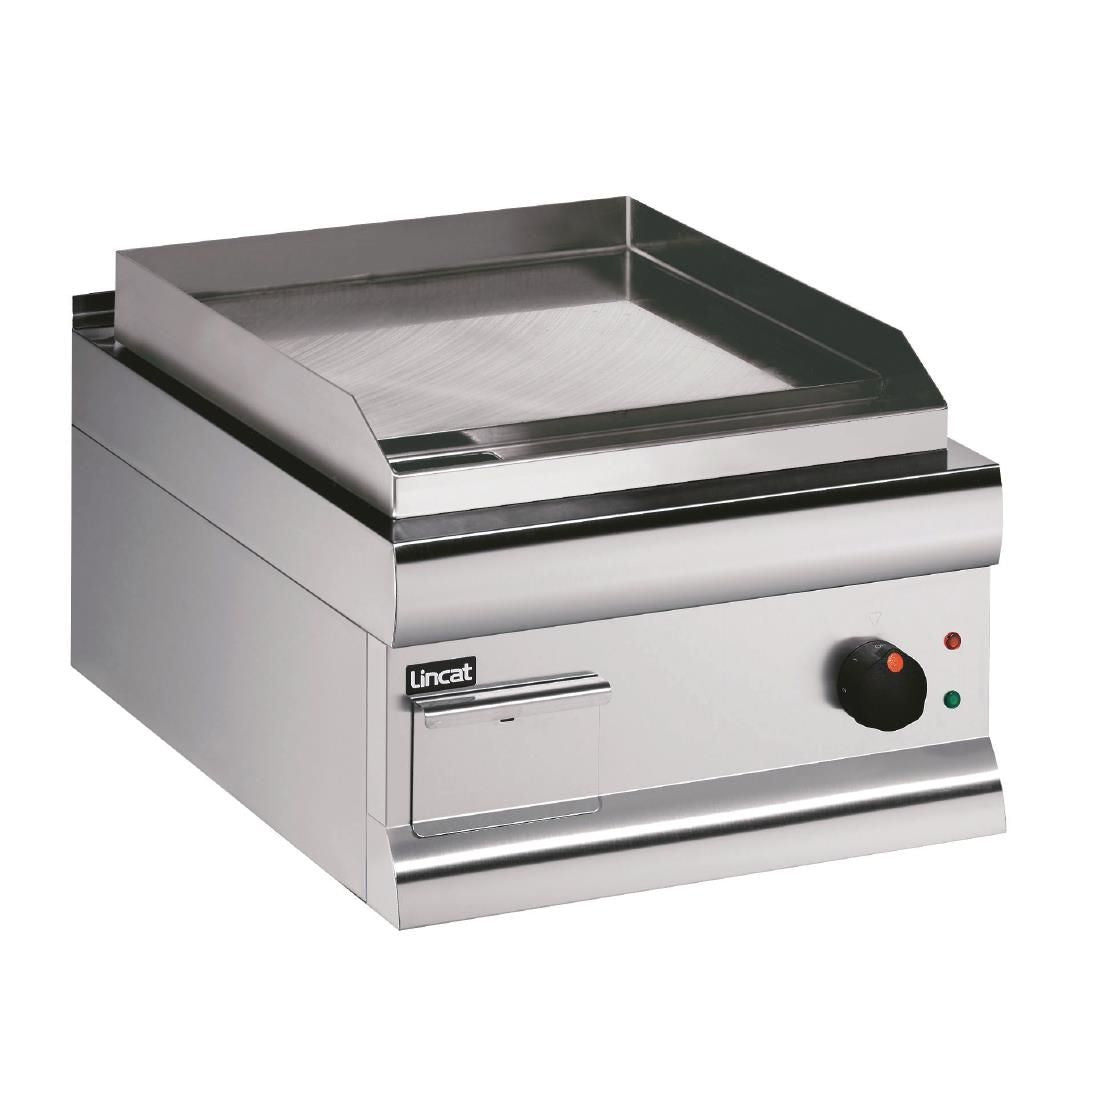 GS4/E - Lincat Silverlink 600 Electric Counter-top Griddle - Extra Power - W 450 mm - 3.7 kW JD Catering Equipment Solutions Ltd